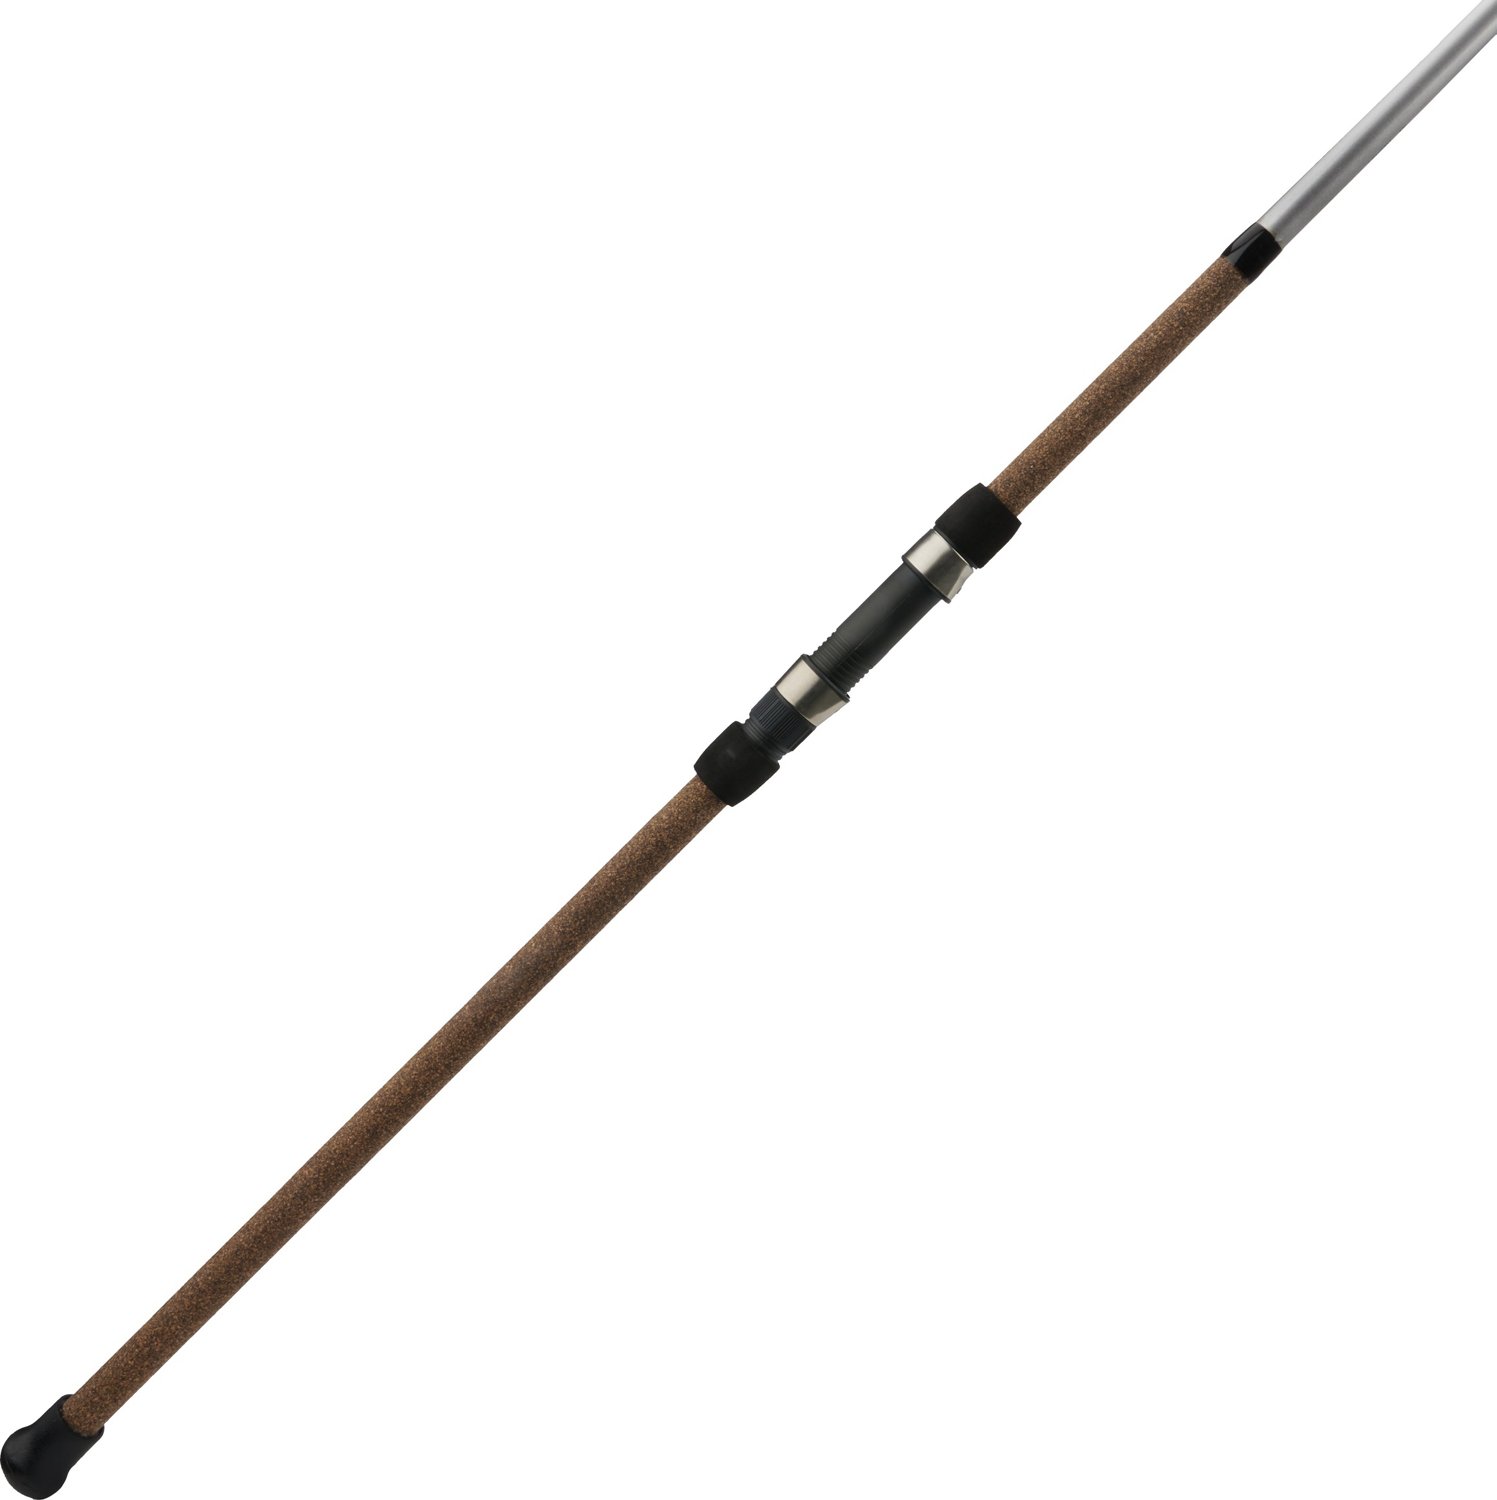 PAIR OF XCALIBER MARINE SALTWATER RODS TURBO GUIDES 80-130 LB - AbuMaizar  Dental Roots Clinic